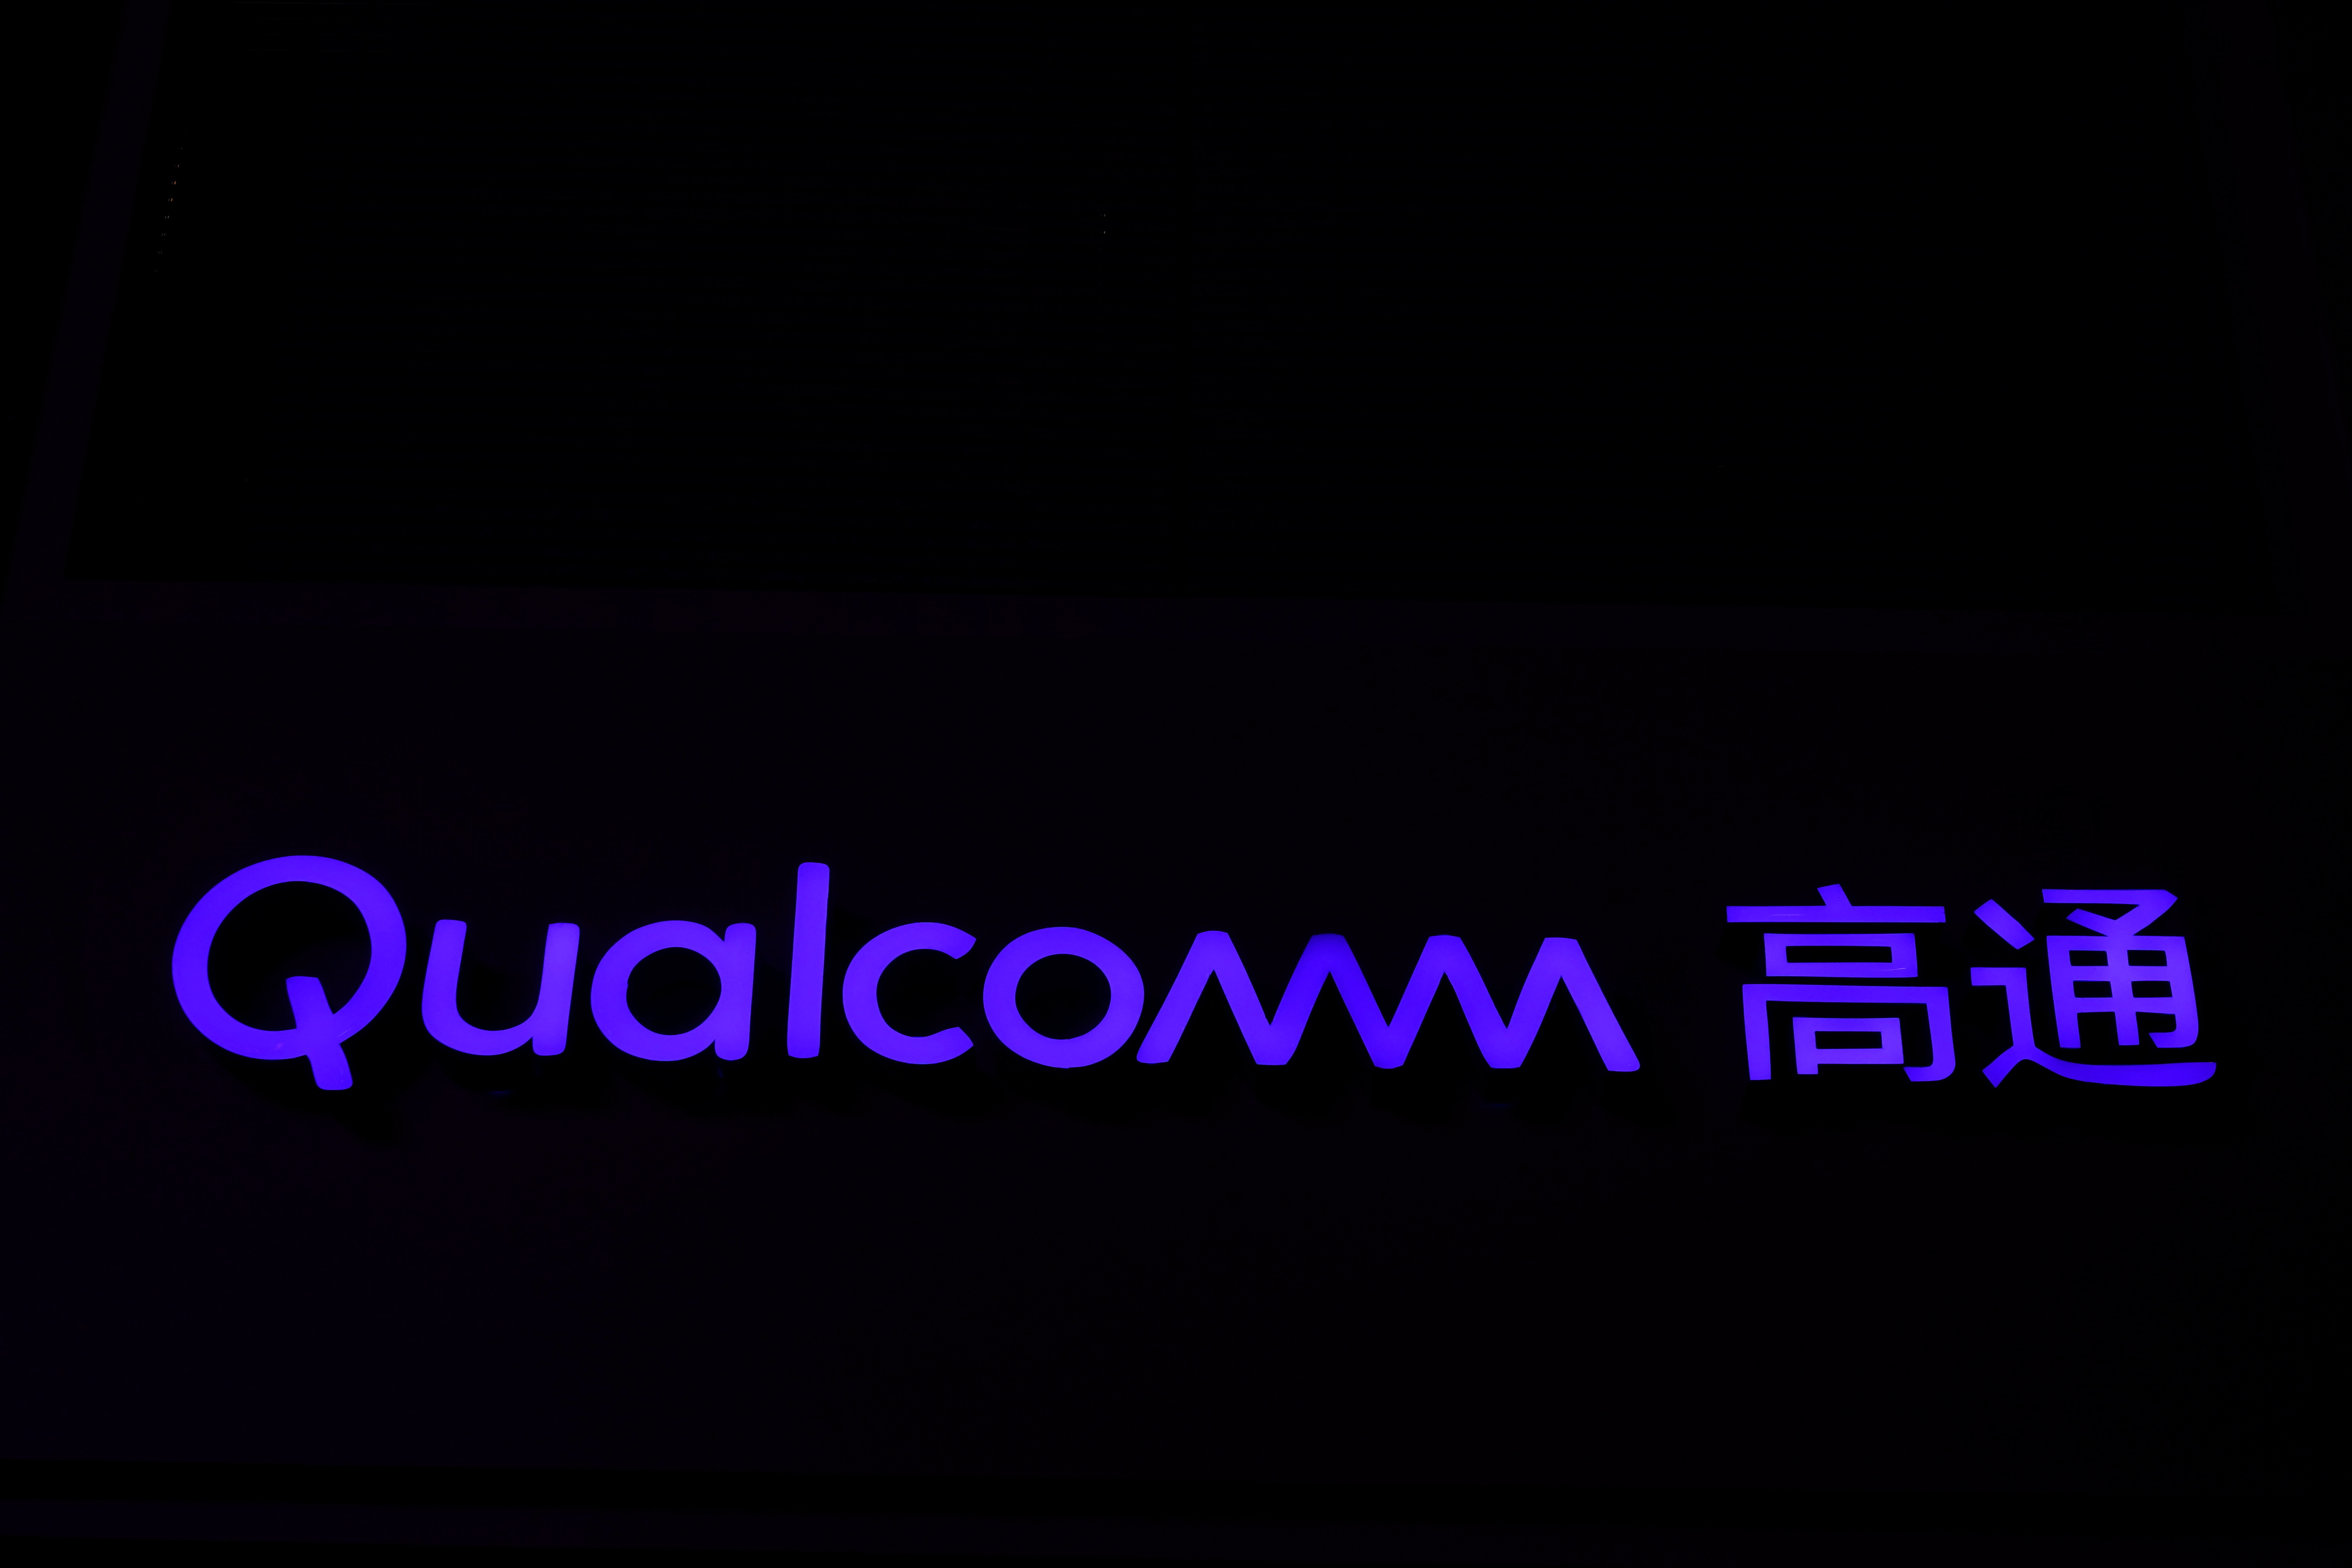 A Qualcomm sign is seen at the third China International Import Expo (CIIE) in Shanghai